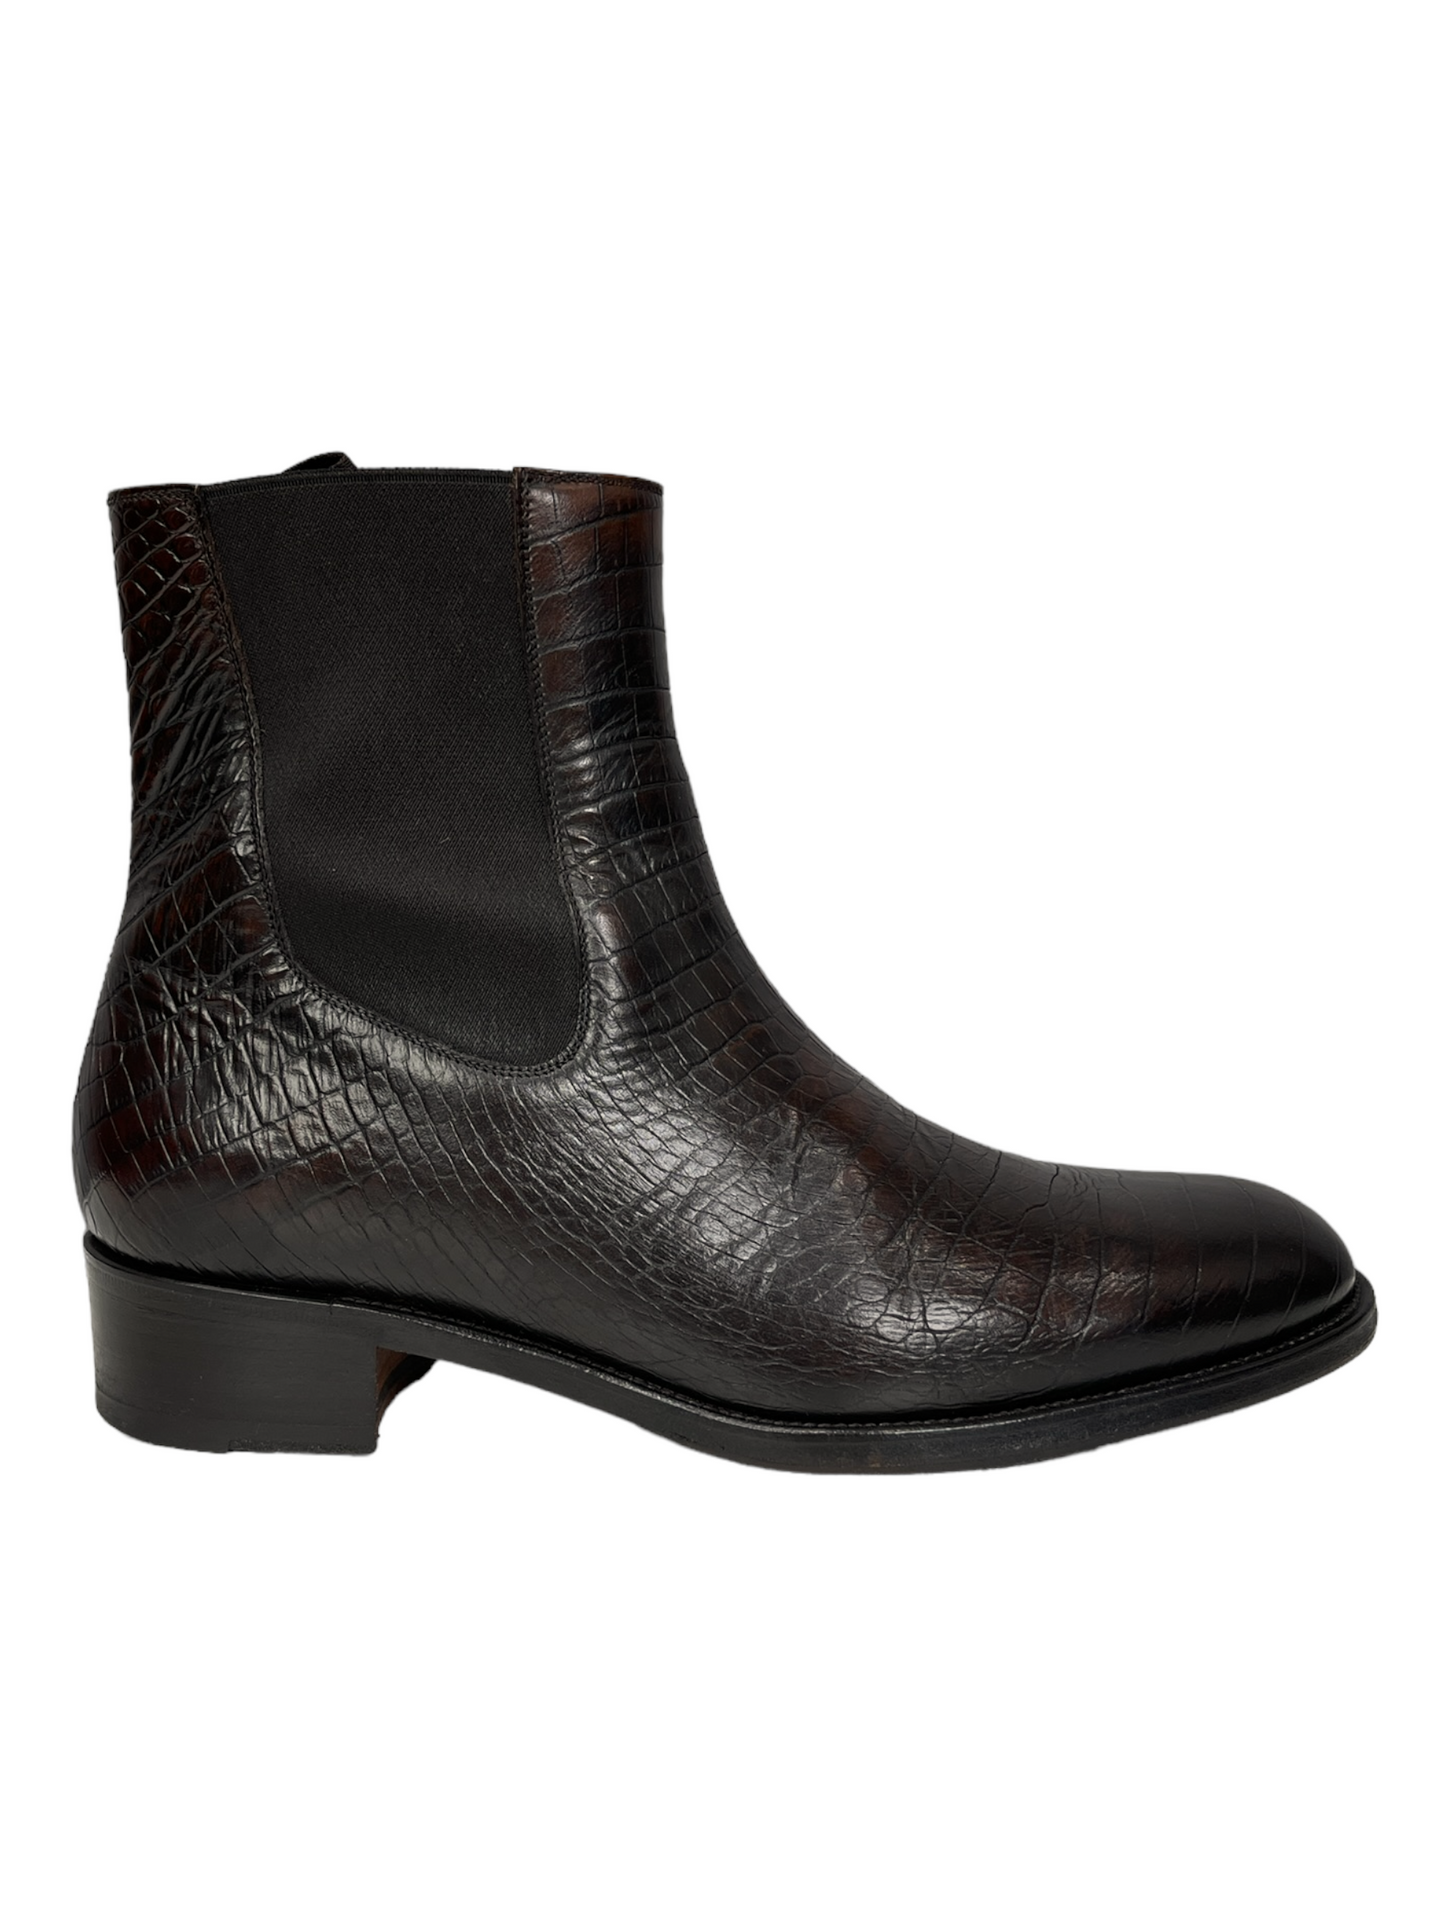 Tom Ford Brown Crocodile Leather High Chelsea Boots 6- Genuine Design Luxury Consignment Calgary, Alberta, Canada New and Pre-Owned Clothing, Shoes, Accessories.